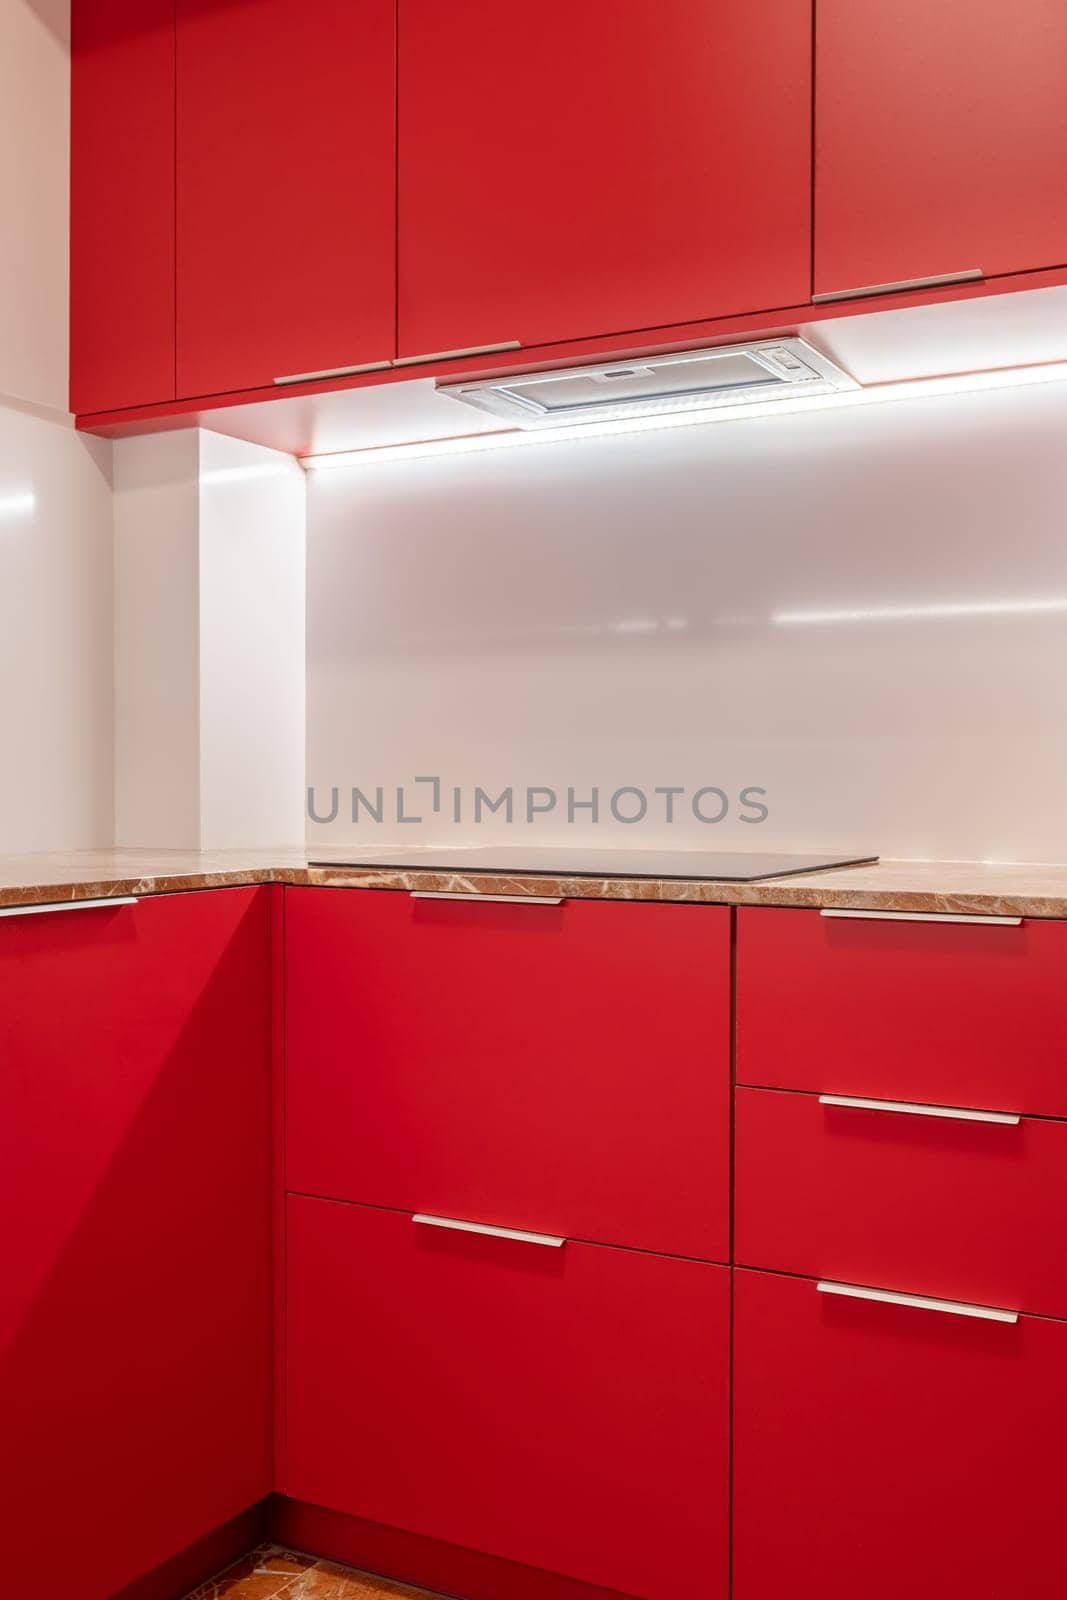 Minimalist kitchen corner with vibrant red cabinets and white walls by apavlin